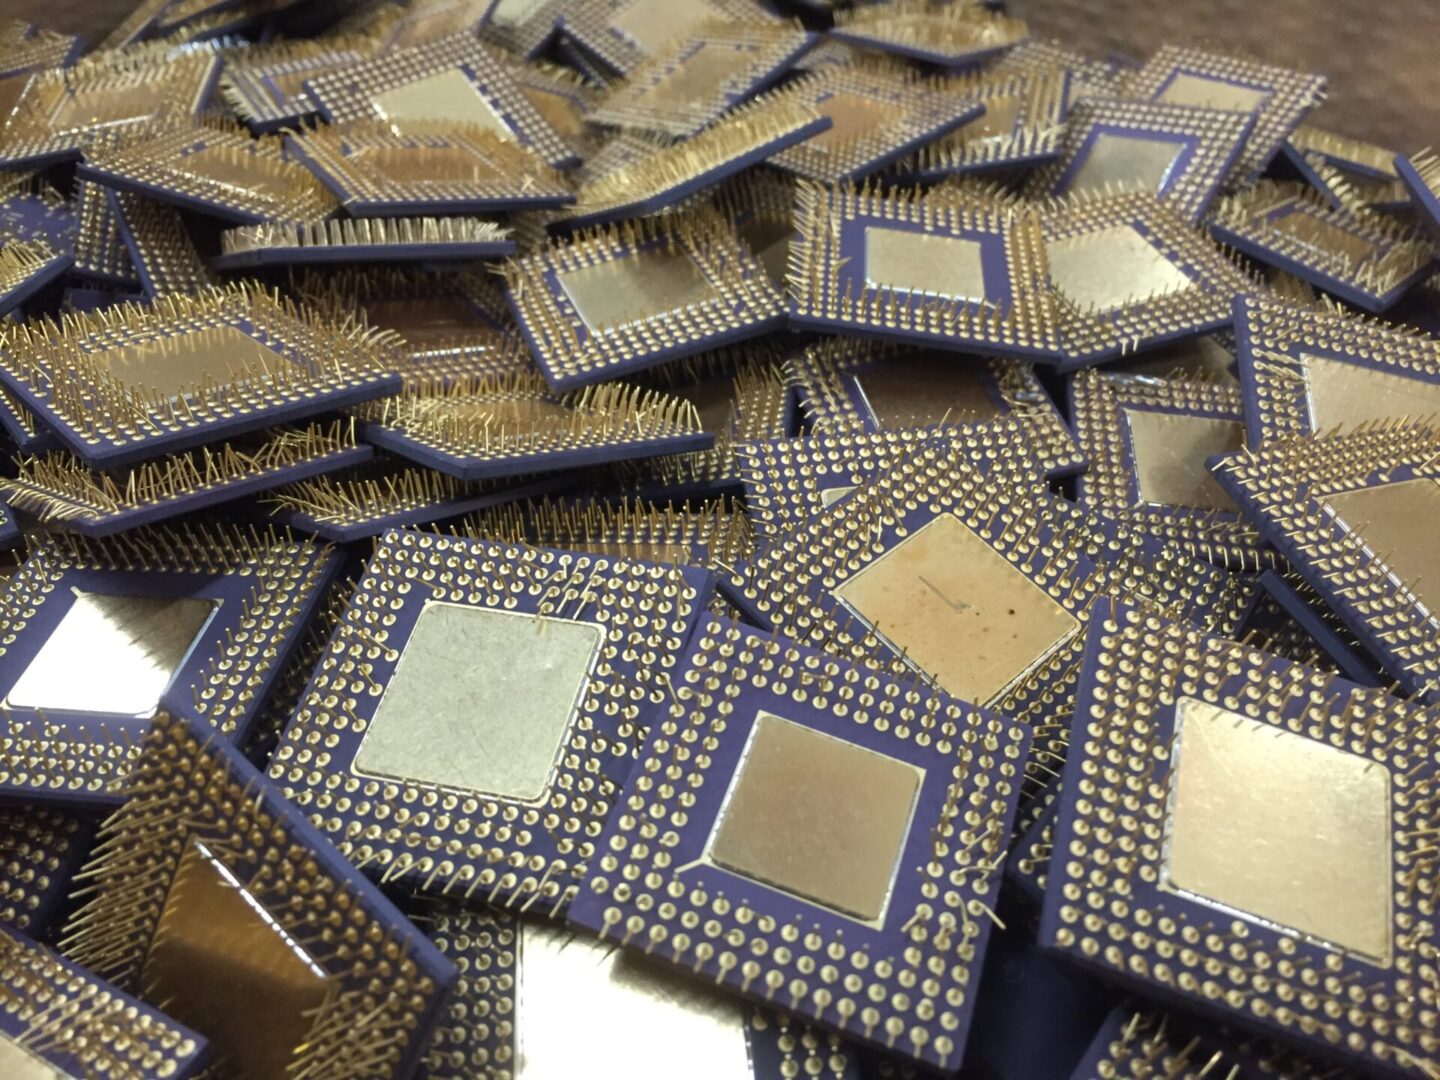 A pile of computer chips sitting on top of each other.